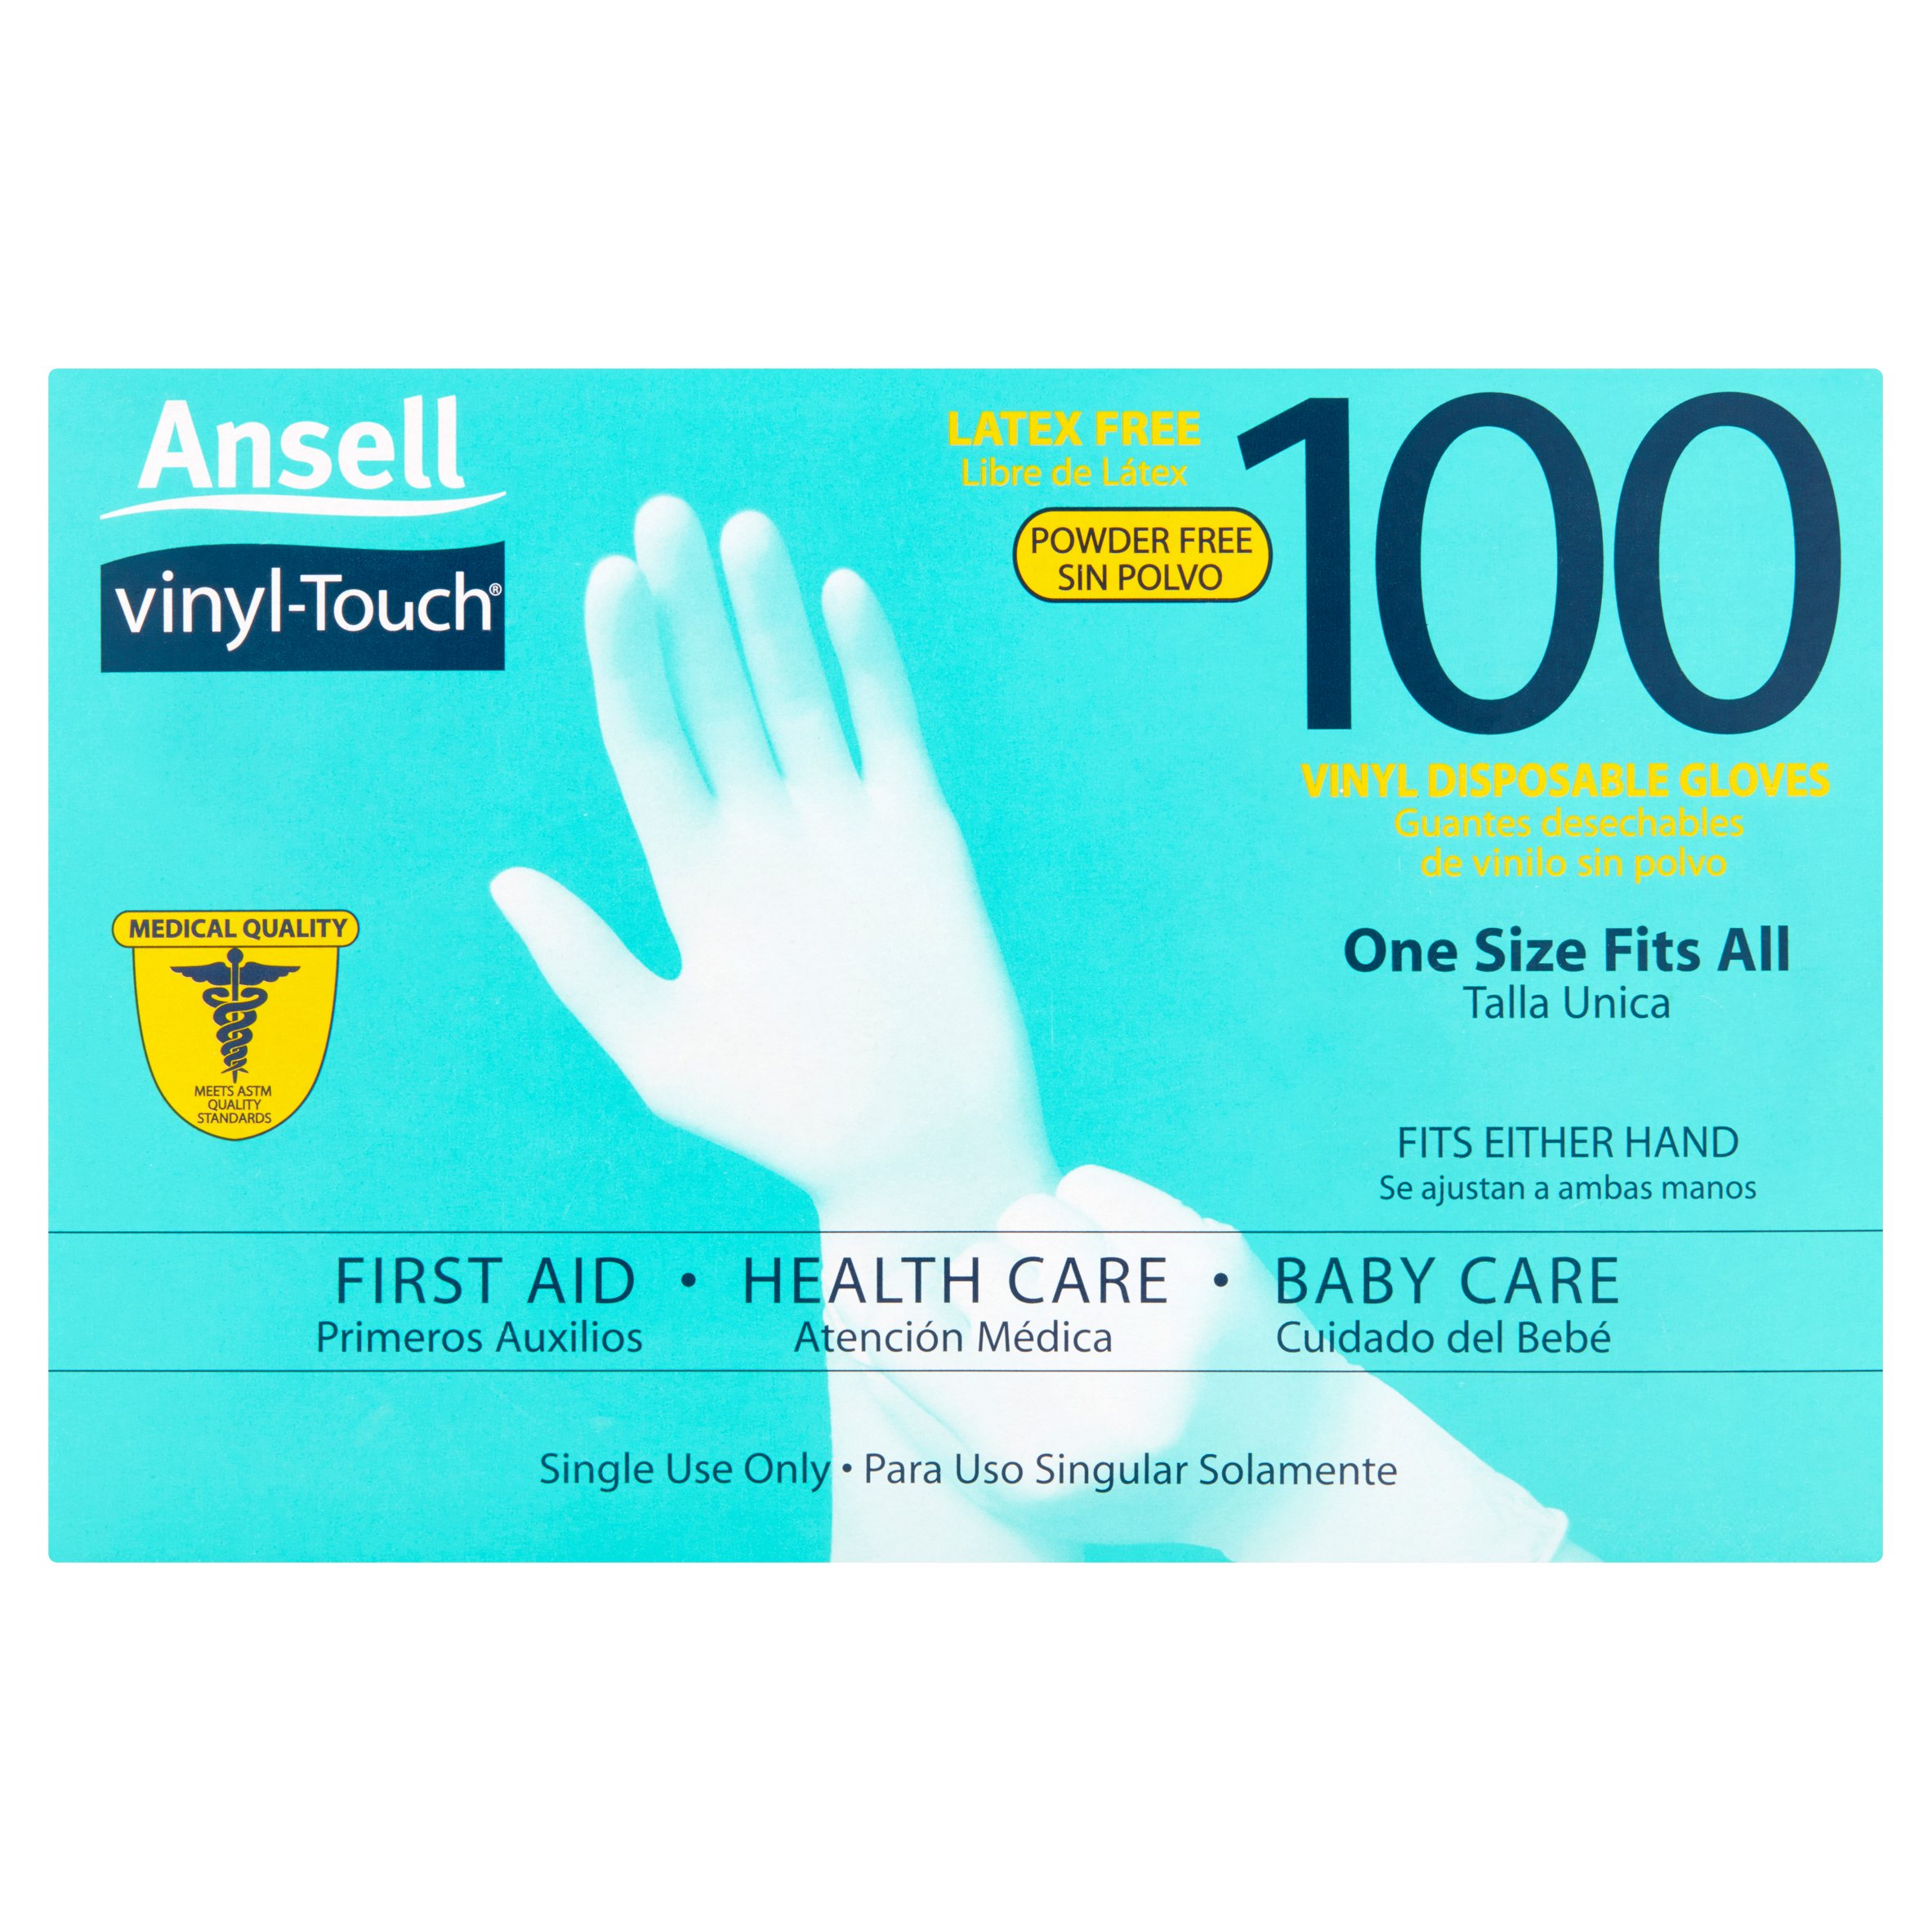 Ansell Vinyl Touch Gloves – Multi-Purpose, Disposable, Latex-Free, One Size Fits All! 100ct Gloves - image 1 of 4